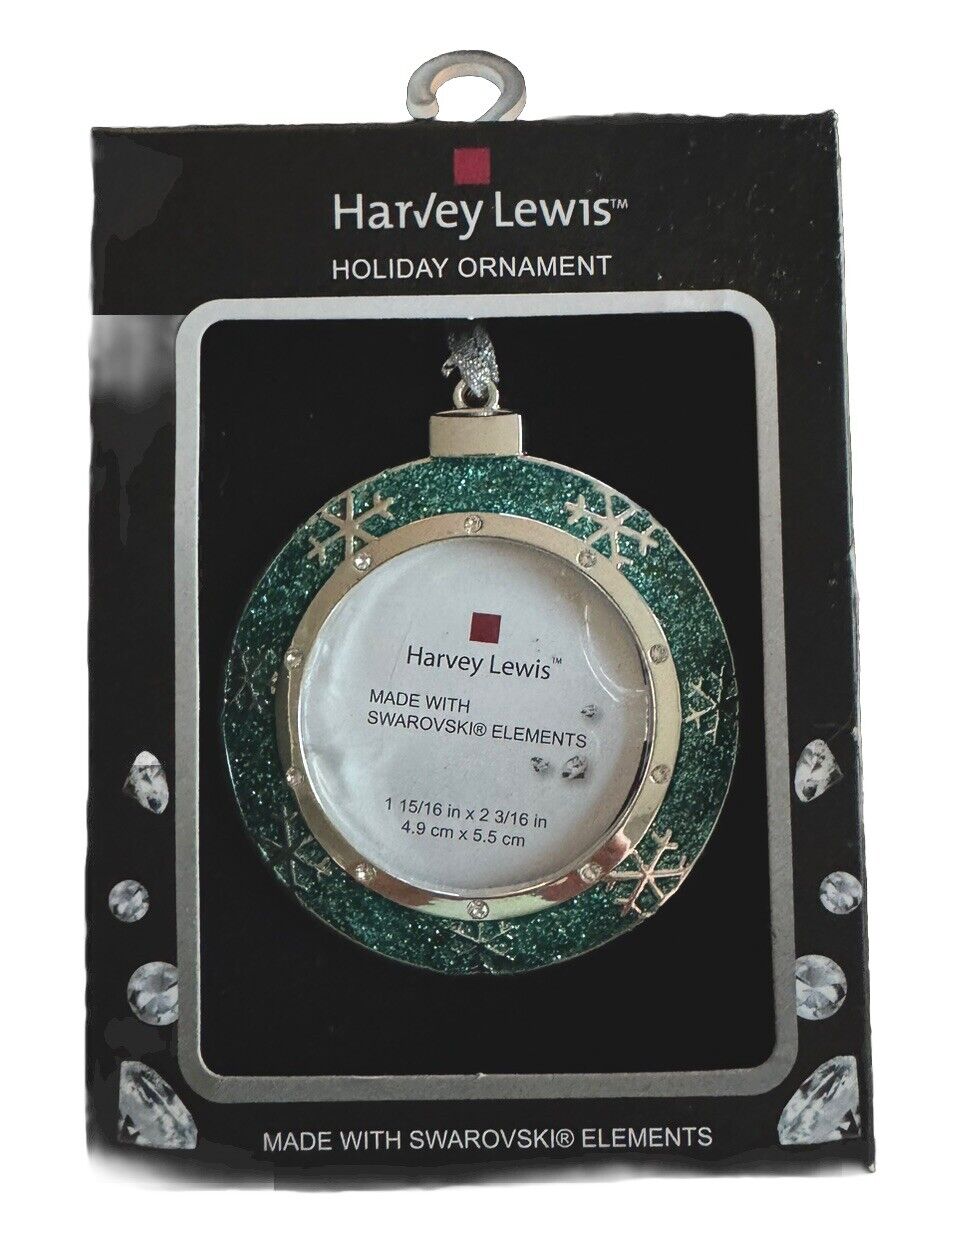 Harvey Lewis Holiday Ornament Made With Swarovski Elements - New In Box 